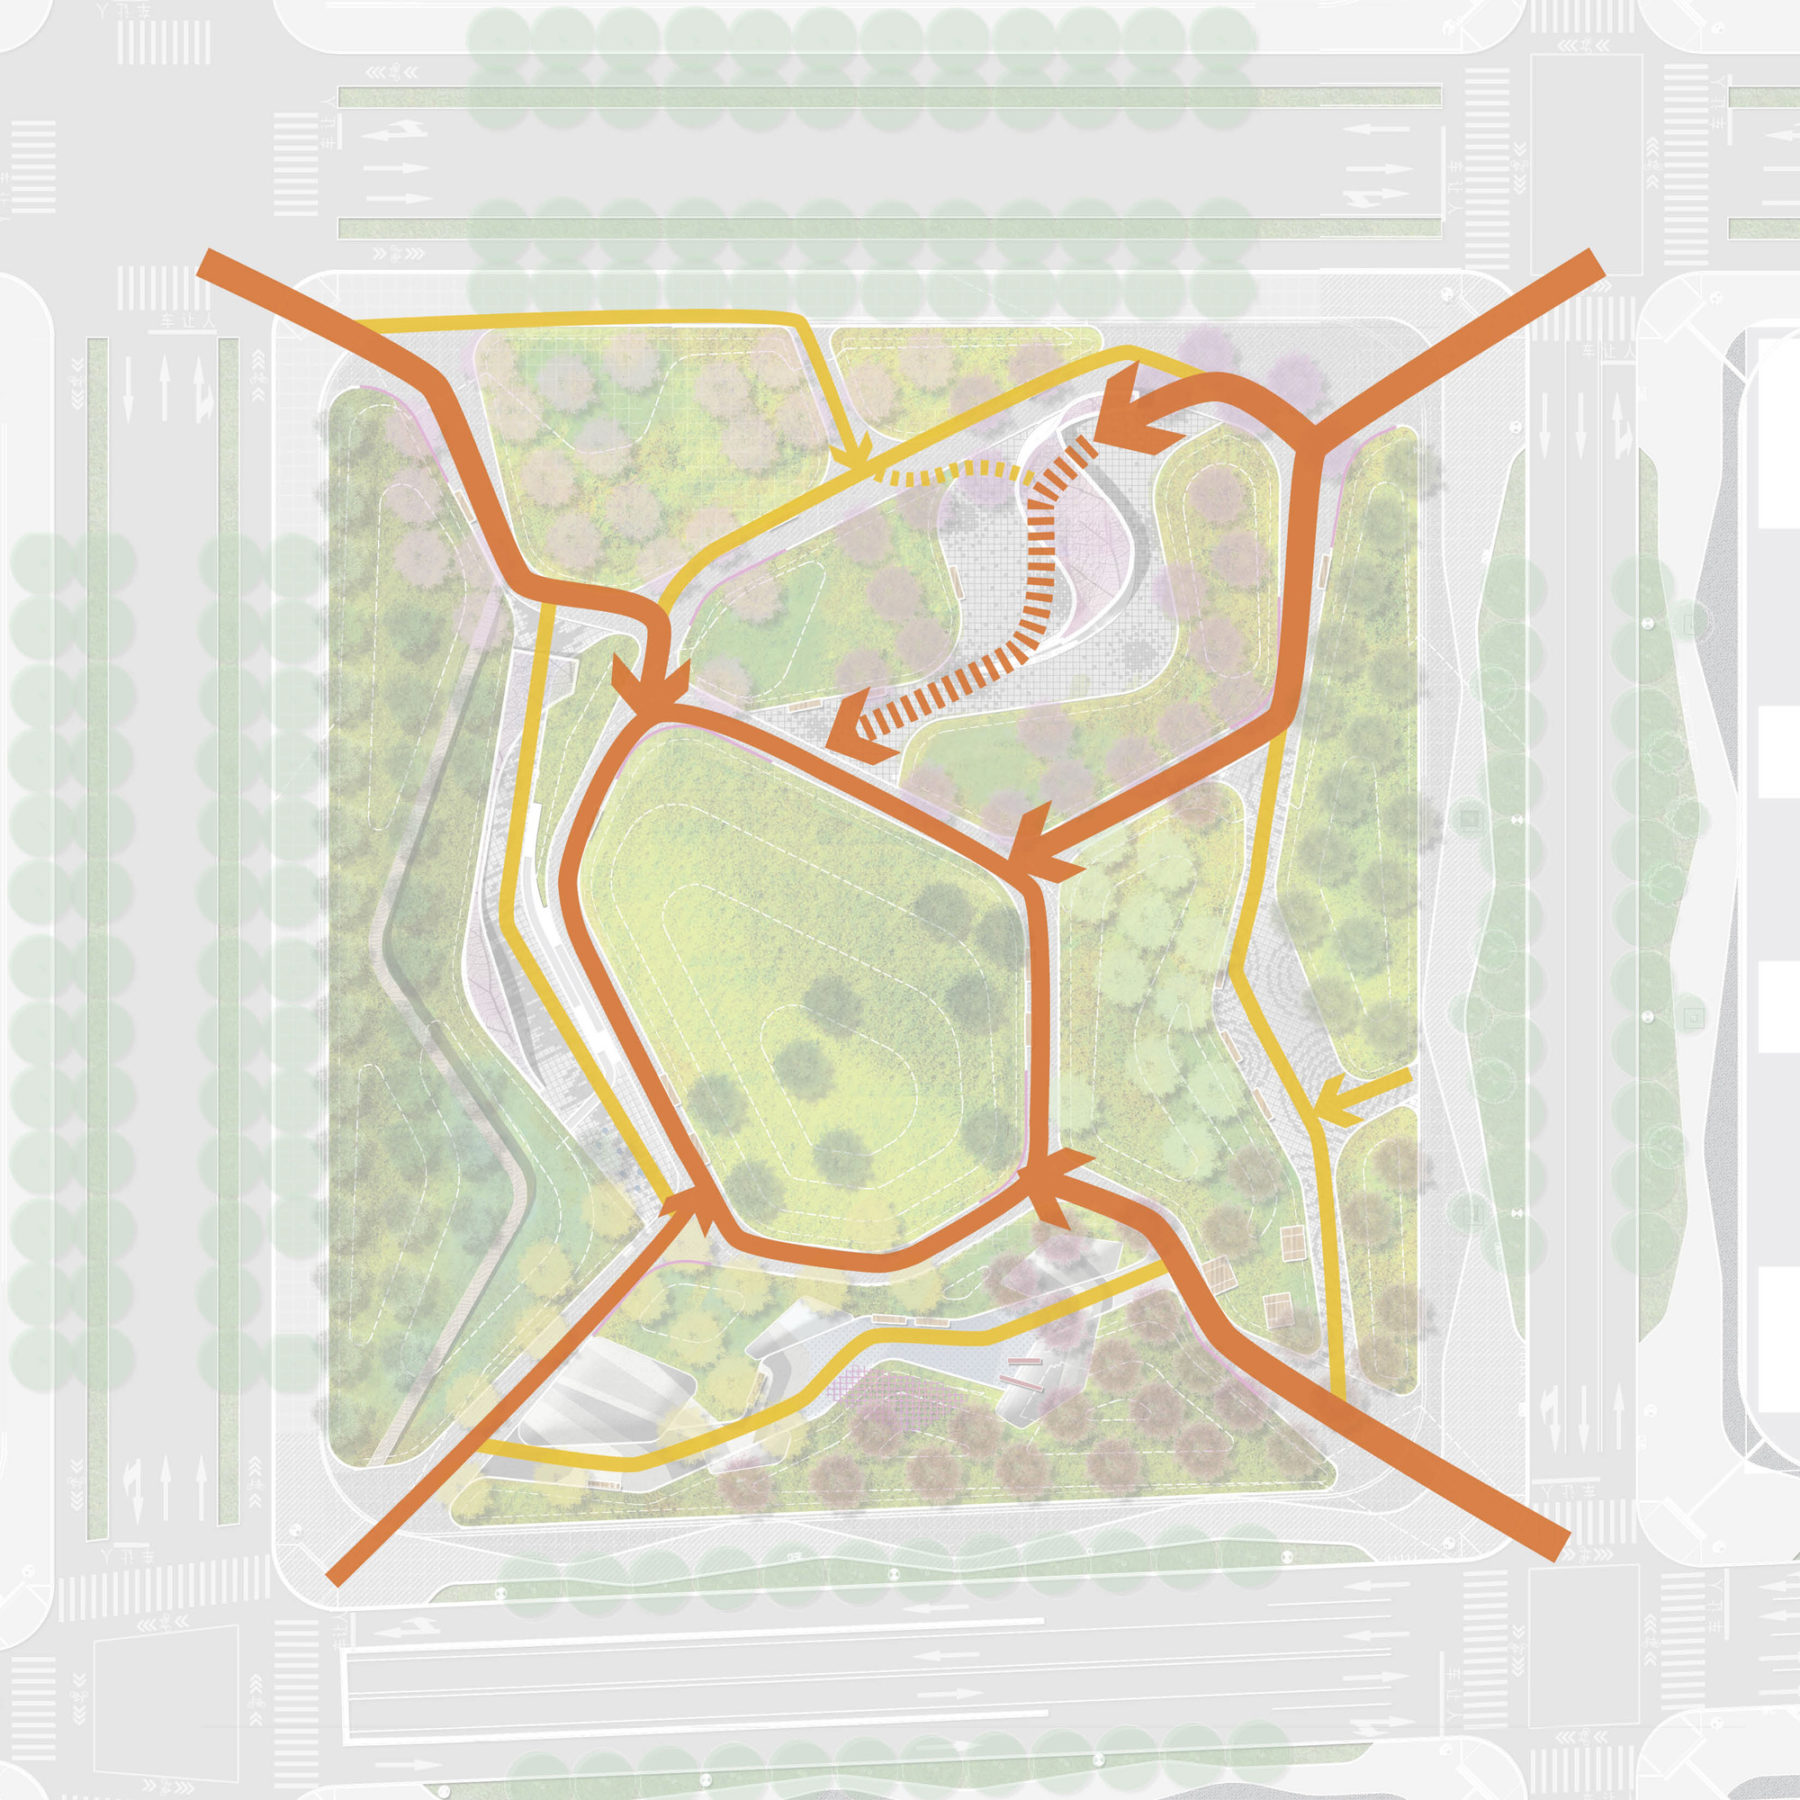 Diagram displaying the direction of foot traffic into the center of the park